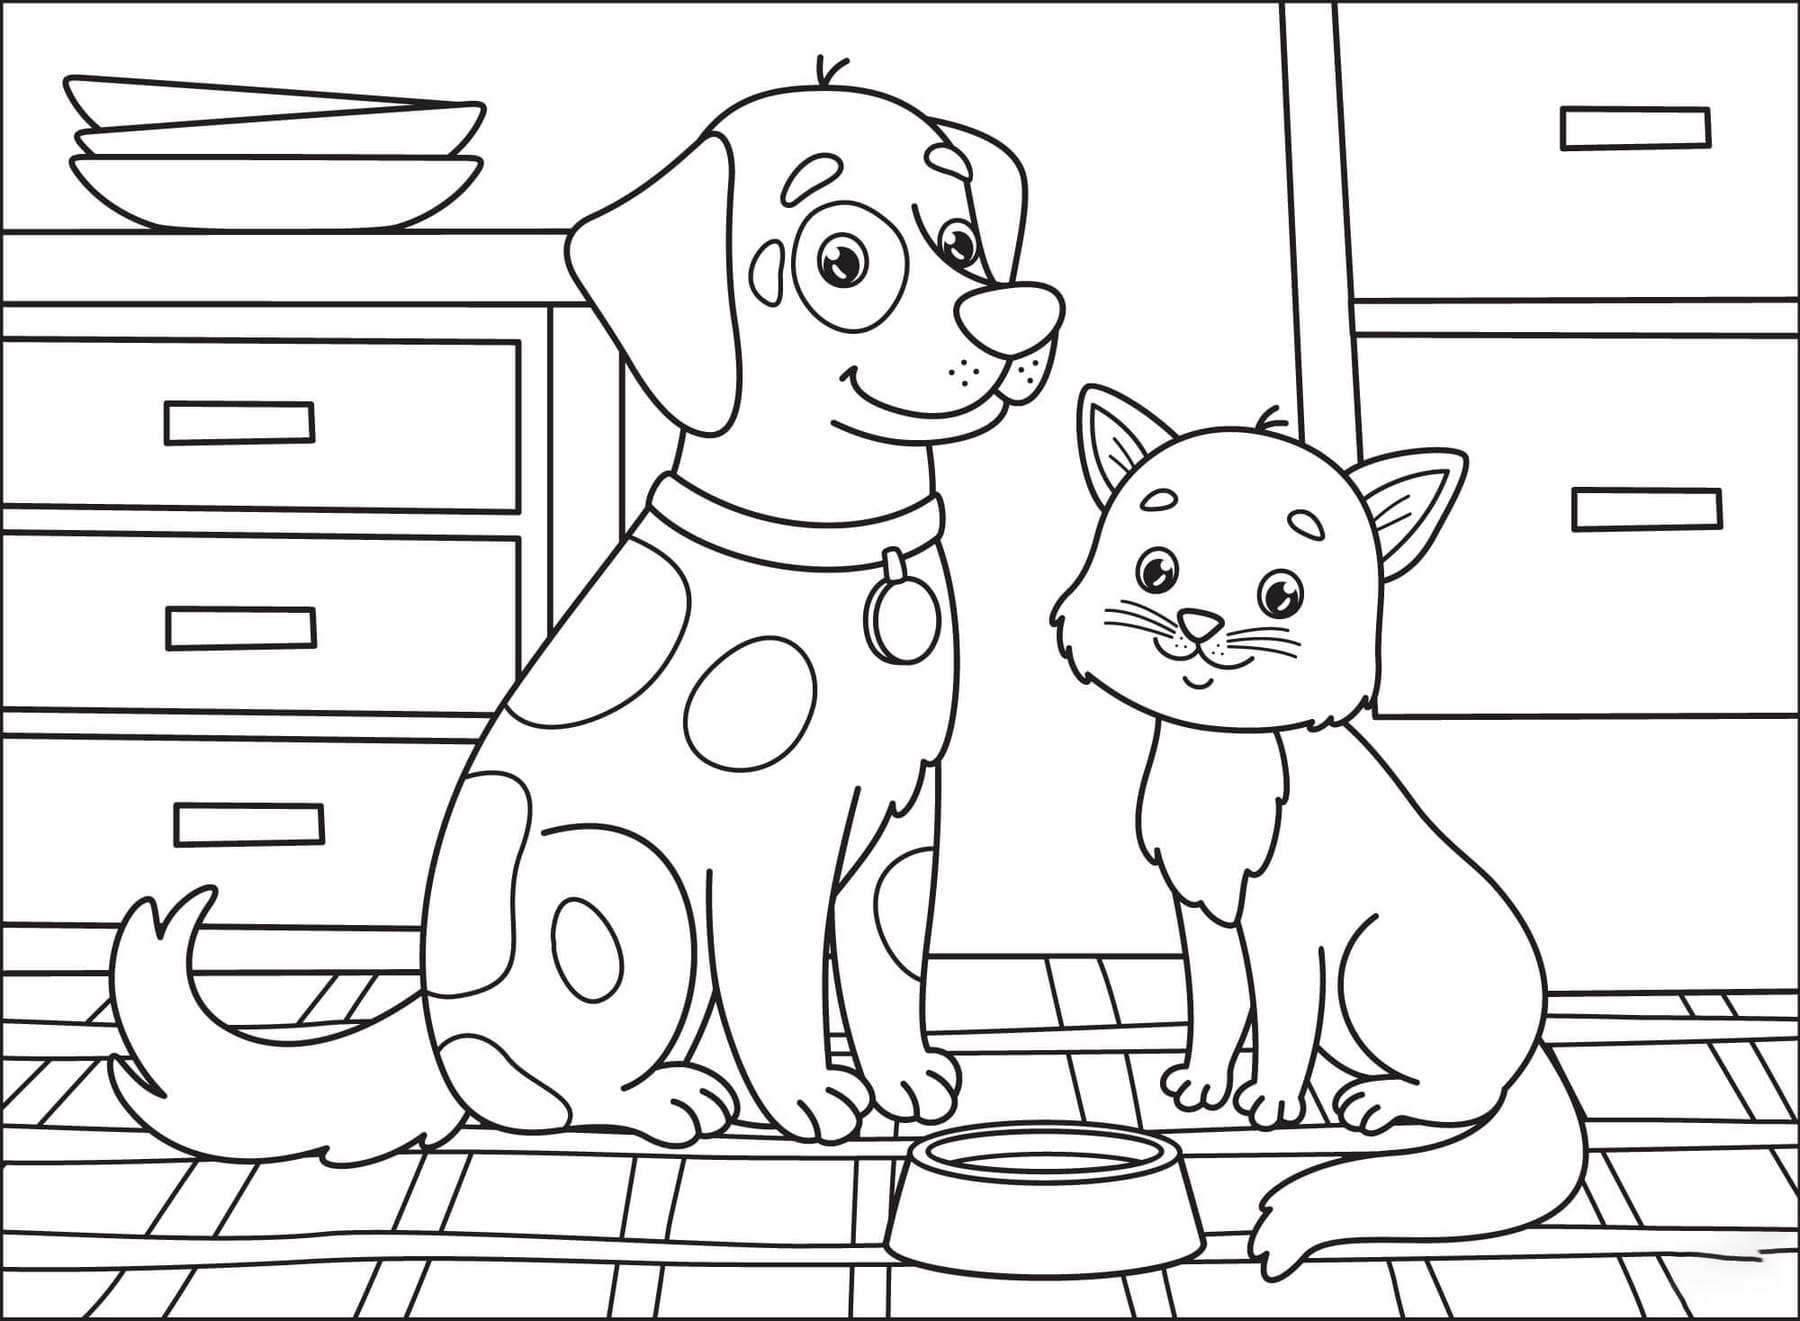 Dog and Cat Coloring Pages - Free Printable Coloring Pages for Kids